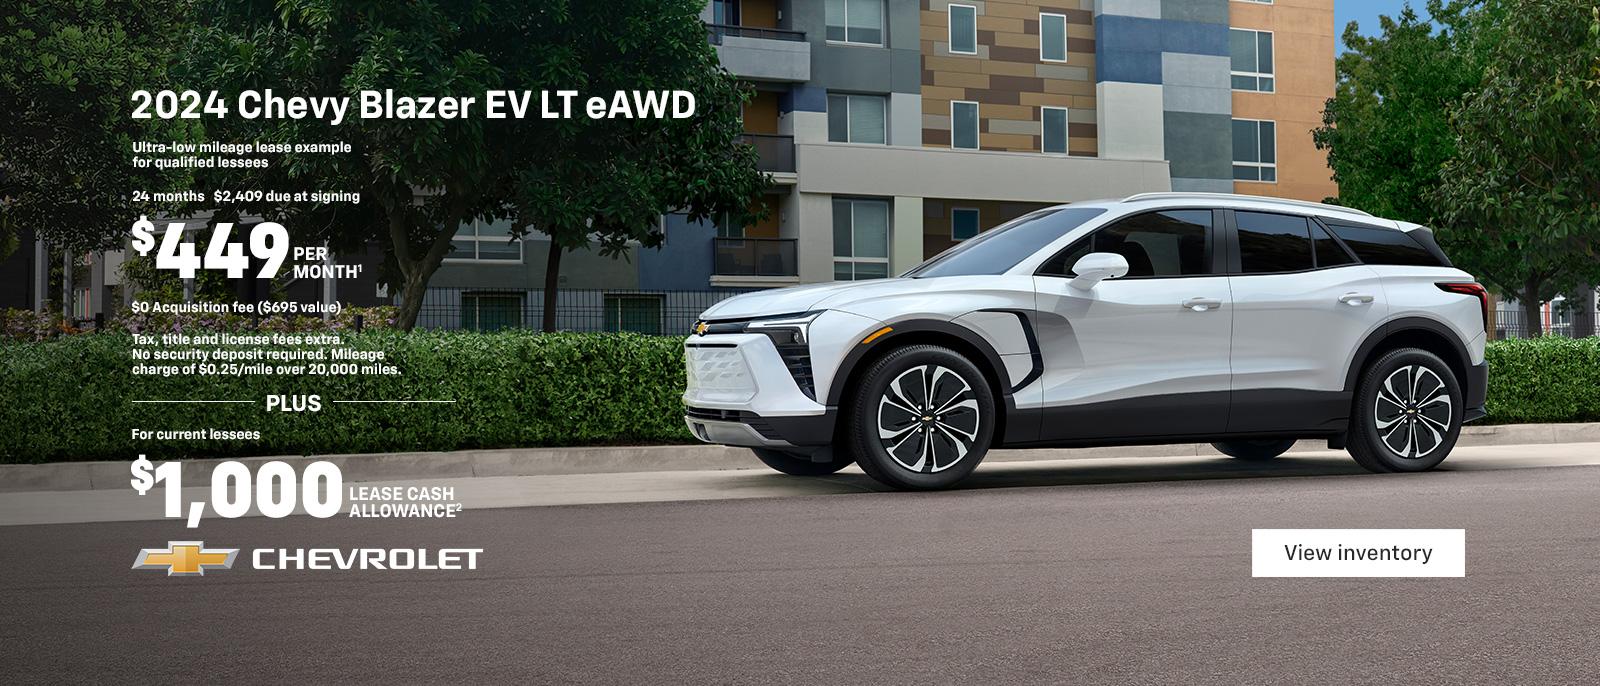 2024 Chevy Blazer EV LT. 2024 MotorTend SUV of the Year. The first-ever, all-electric Blazer EV. Ultra-low mileage lease example for qualified lessees. $449 per month. 24 months. $2,409 due at signing. $0 Acquisition fee ($695 value). Tax, title and license fees extra. No security deposit required. Mileage charge of $0.25/mile over 20,000 miles. Plus for current lessees $1,000 lease cash allowance.